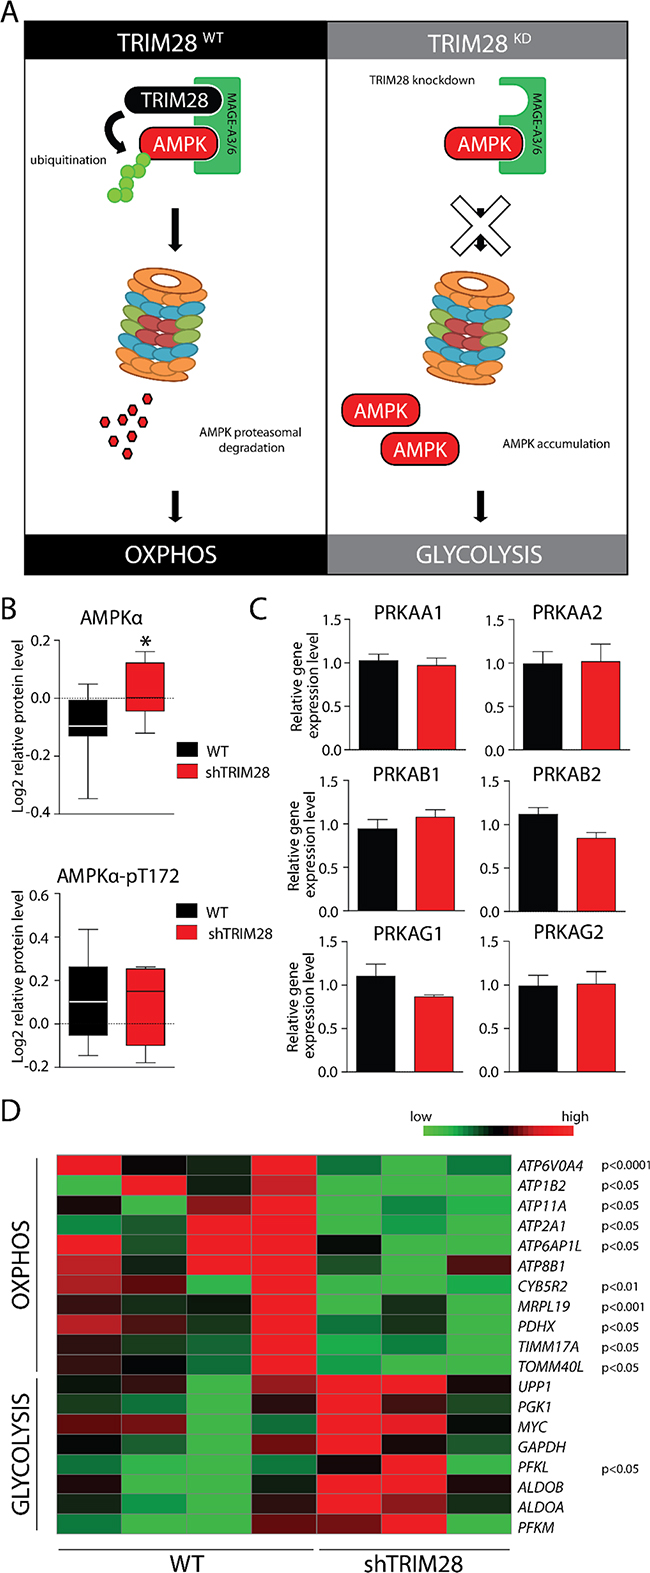 AMPK accumulation upon TRIM28 knockdown mediates metabolic switch from OXPHOS to glycolysis in cancer cells.